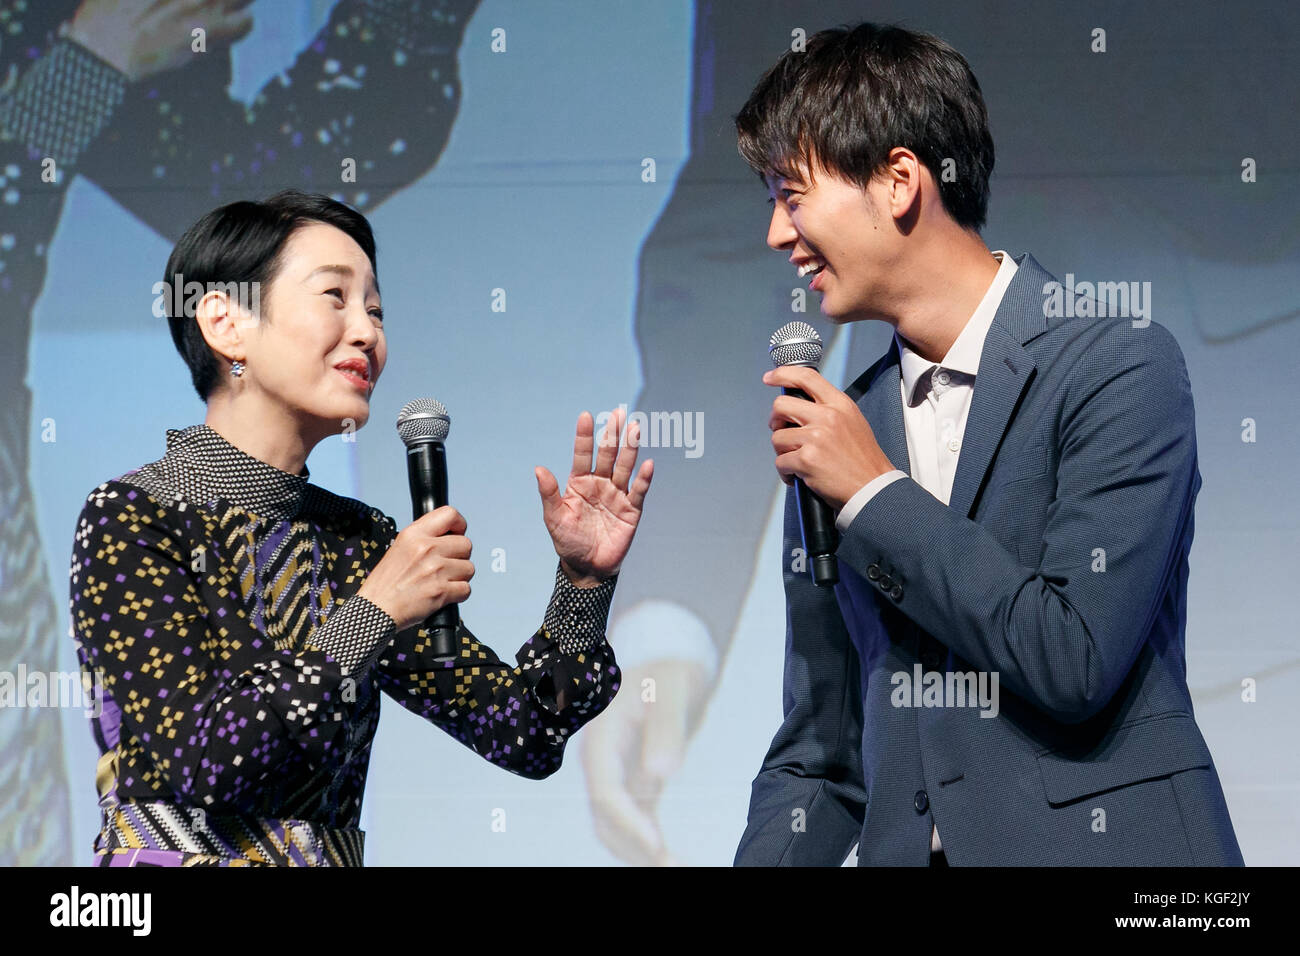 (L to R) Japanese actors Kanako Higuchi, and Ryoma Takeuchi speak during a press event for SoftBank's new TV commercial on November 7, 2017, Tokyo, Japan. Higuchi, Takeuchi and Hana Sugisaki are the new members of ''The White Family, '' a staple of SoftBank's marketing whose characters are among the most popular figures in Japanese TV commercial. Credit: Rodrigo Reyes Marin/AFLO/Alamy Live News Stock Photo